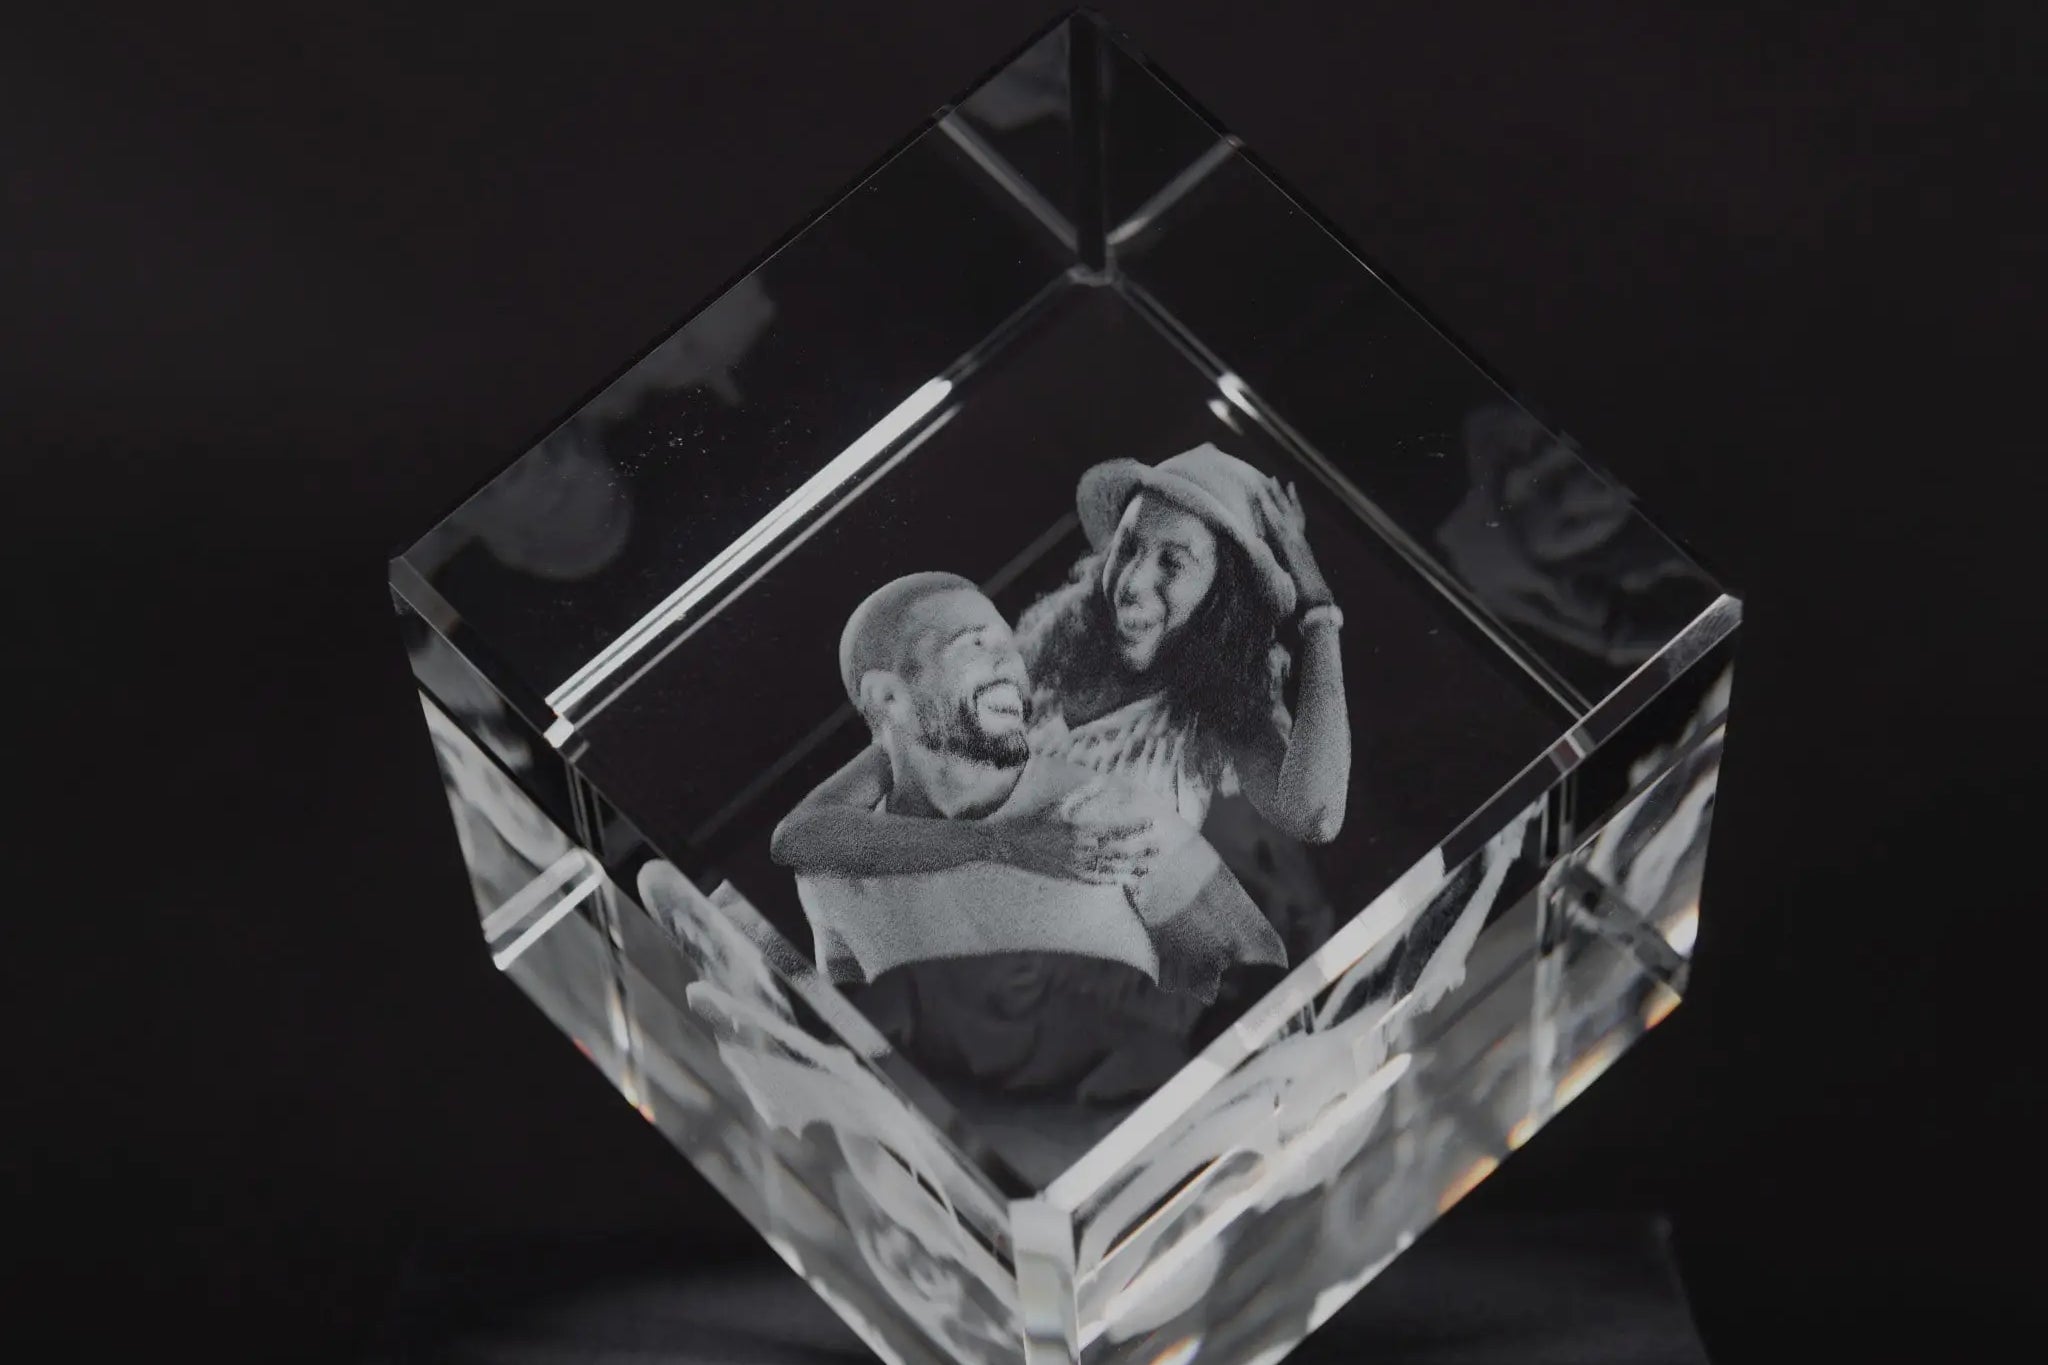 3d crystal photo gift of a happy couple lit up by LED